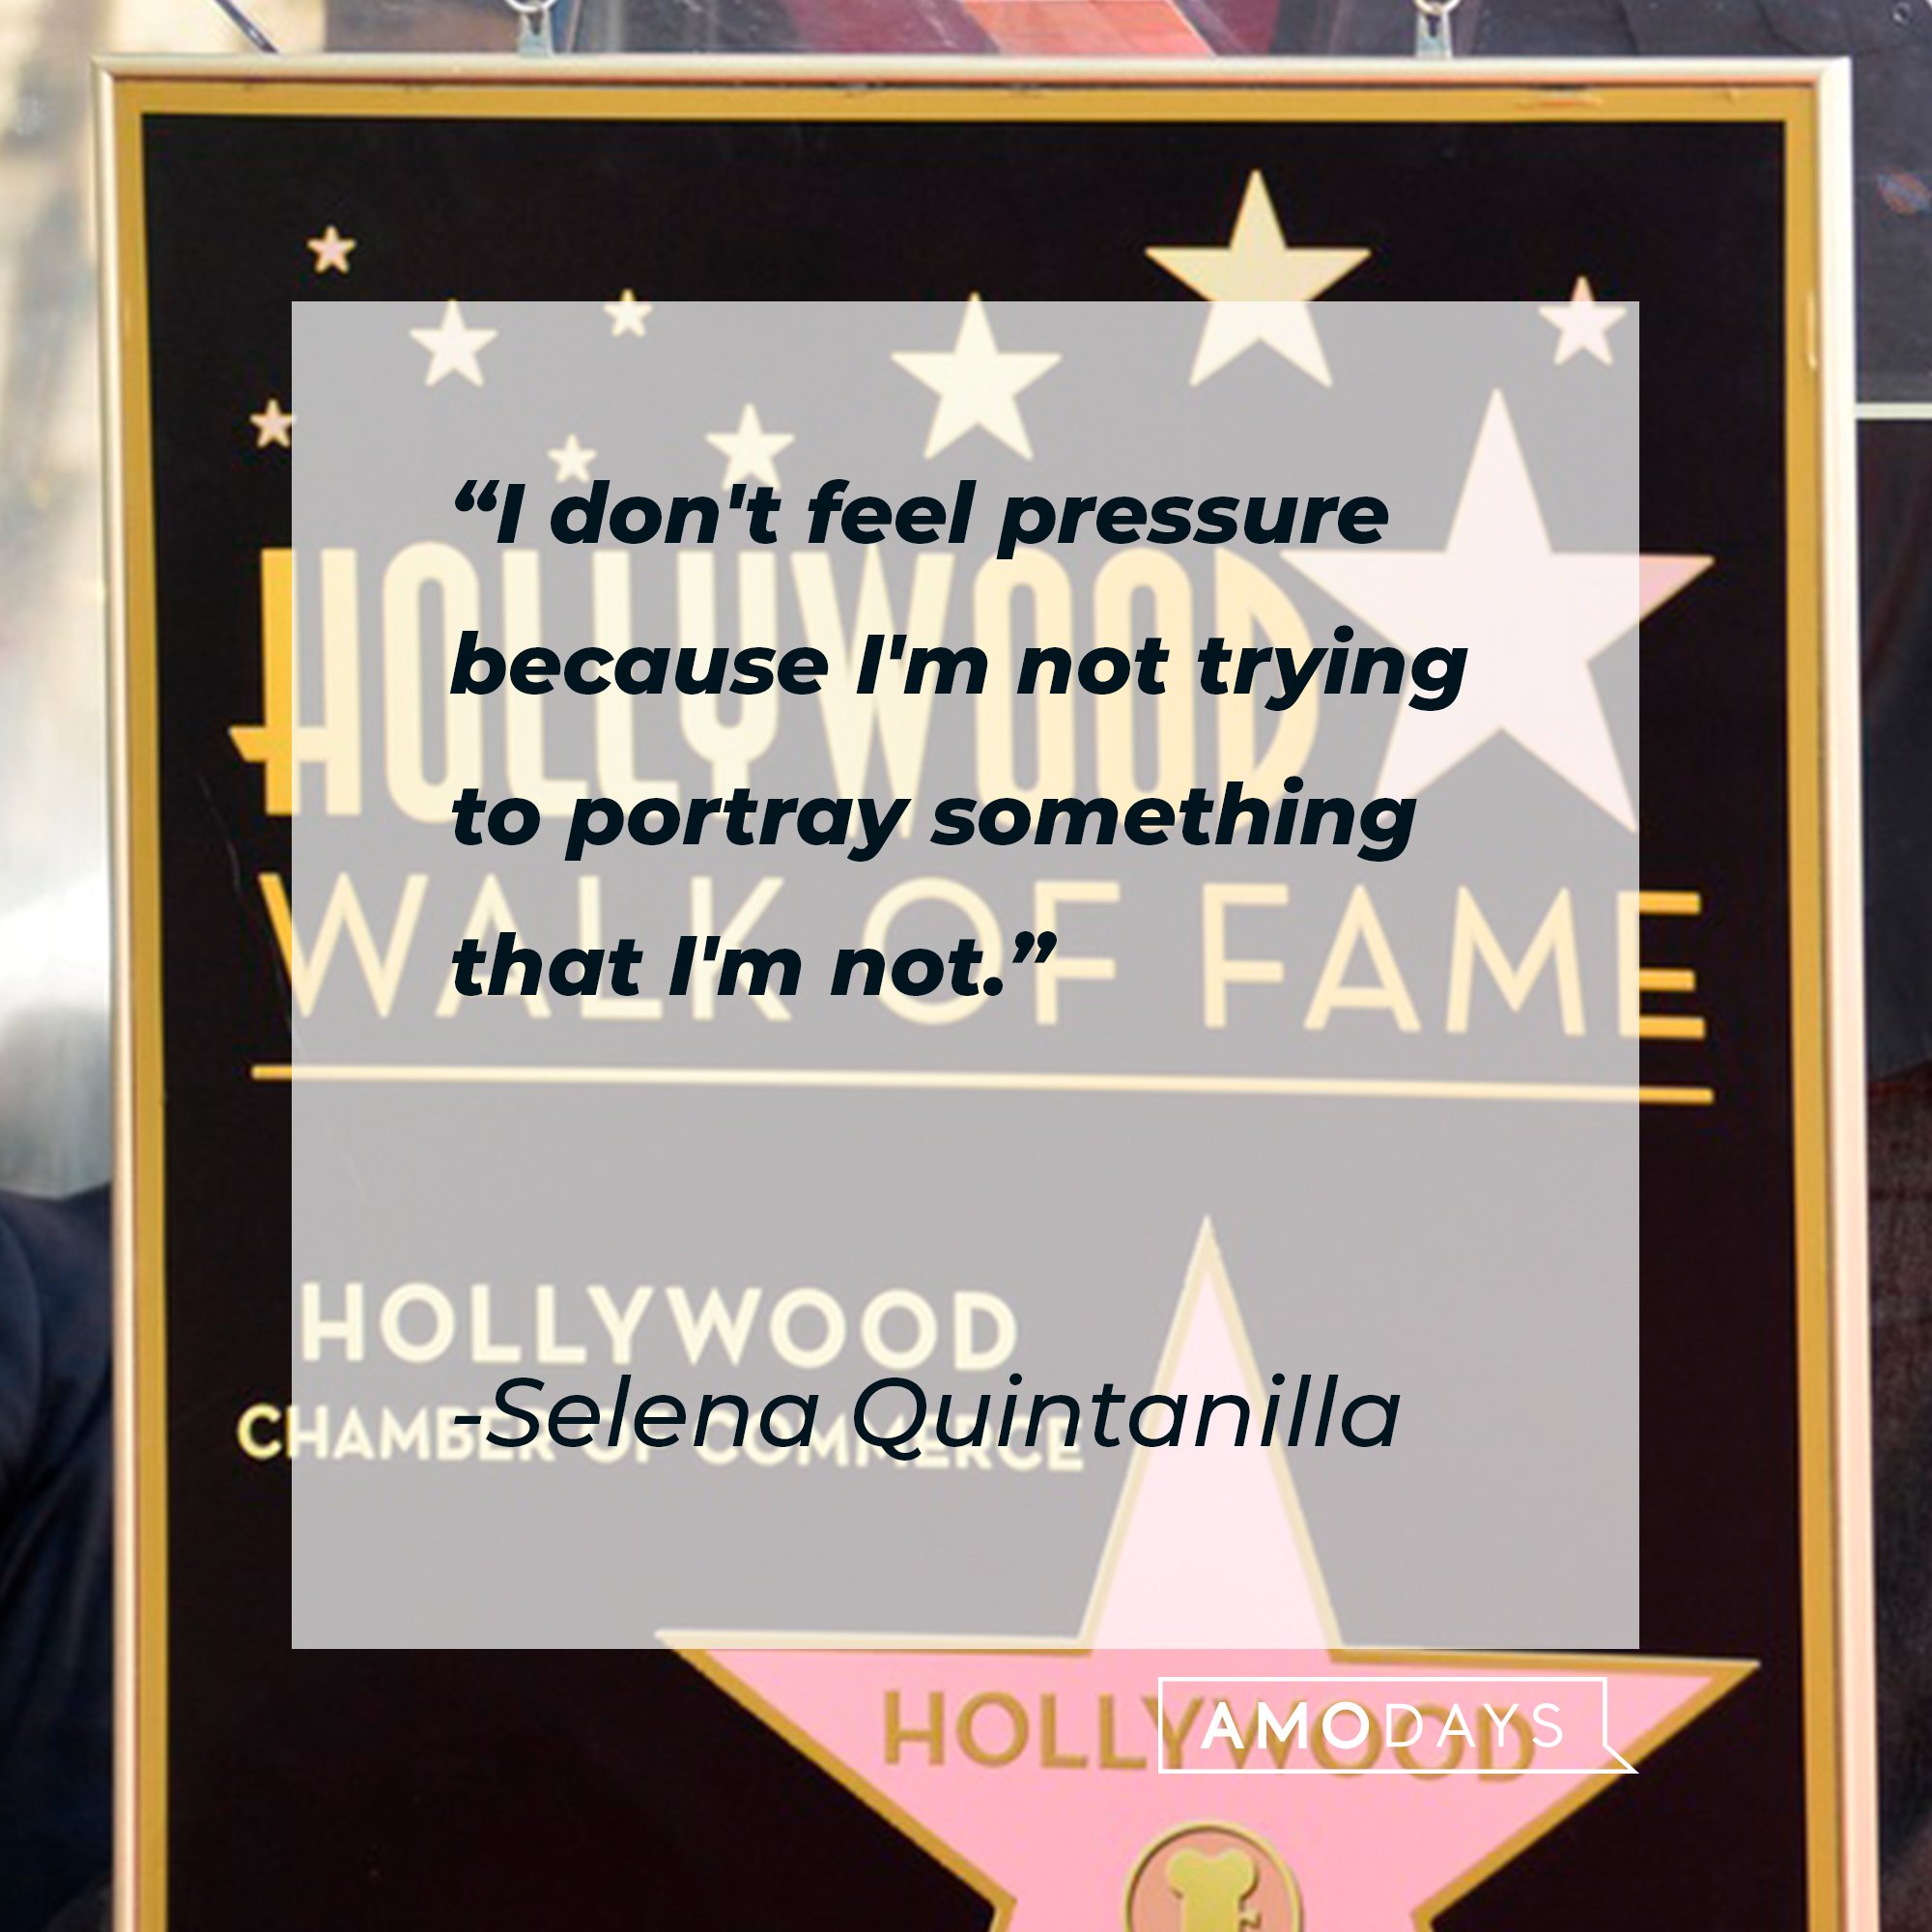 Selena Quintanilla's quote: "I don't feel pressure because I'm not trying to portray something that I'm not." | Image: AmoDays